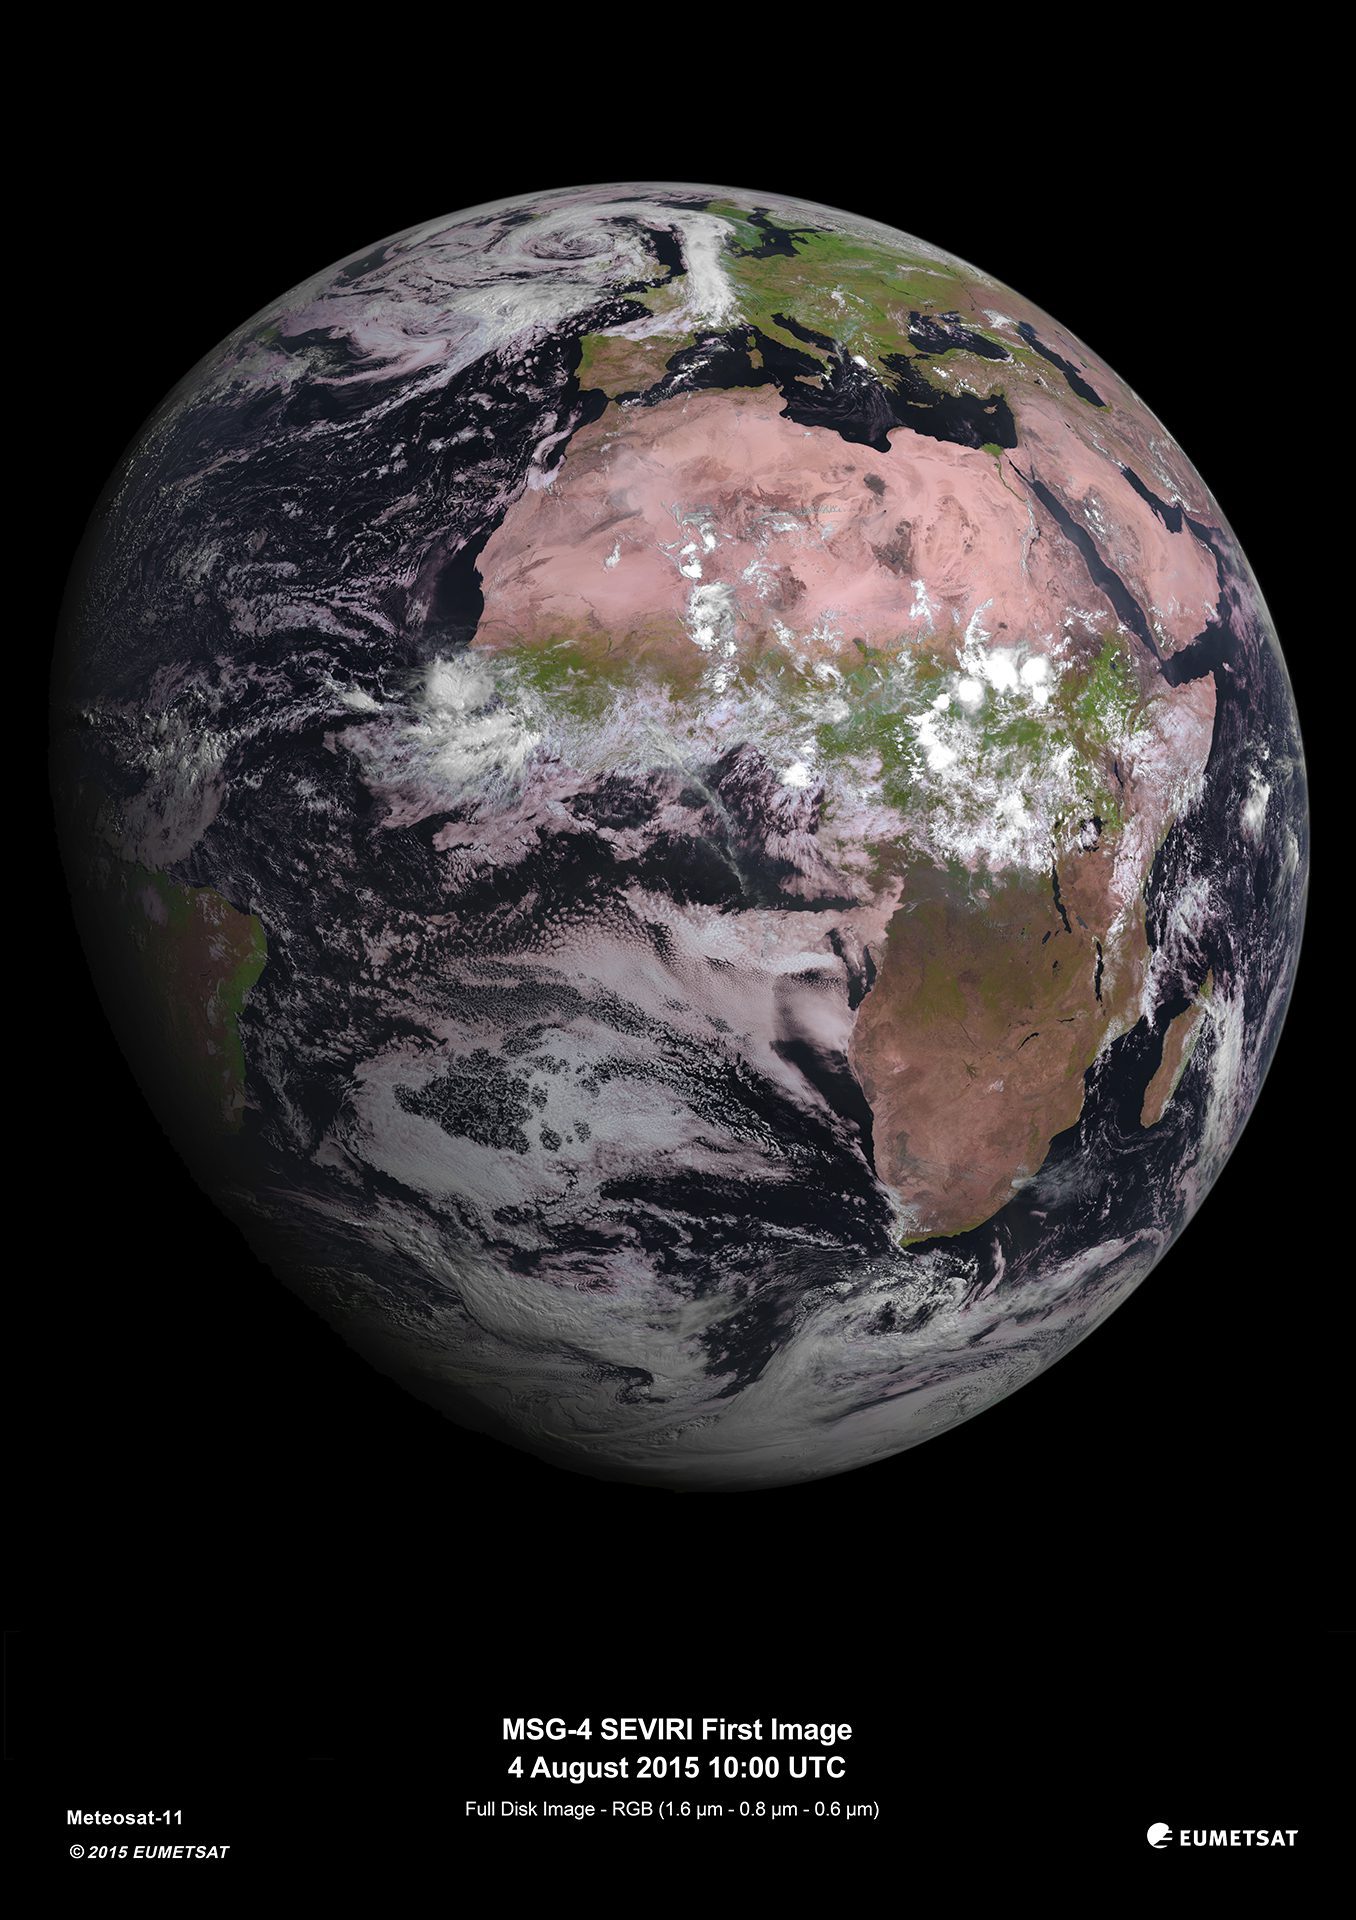 MSG-4 Weather Satellite Delivers First Image